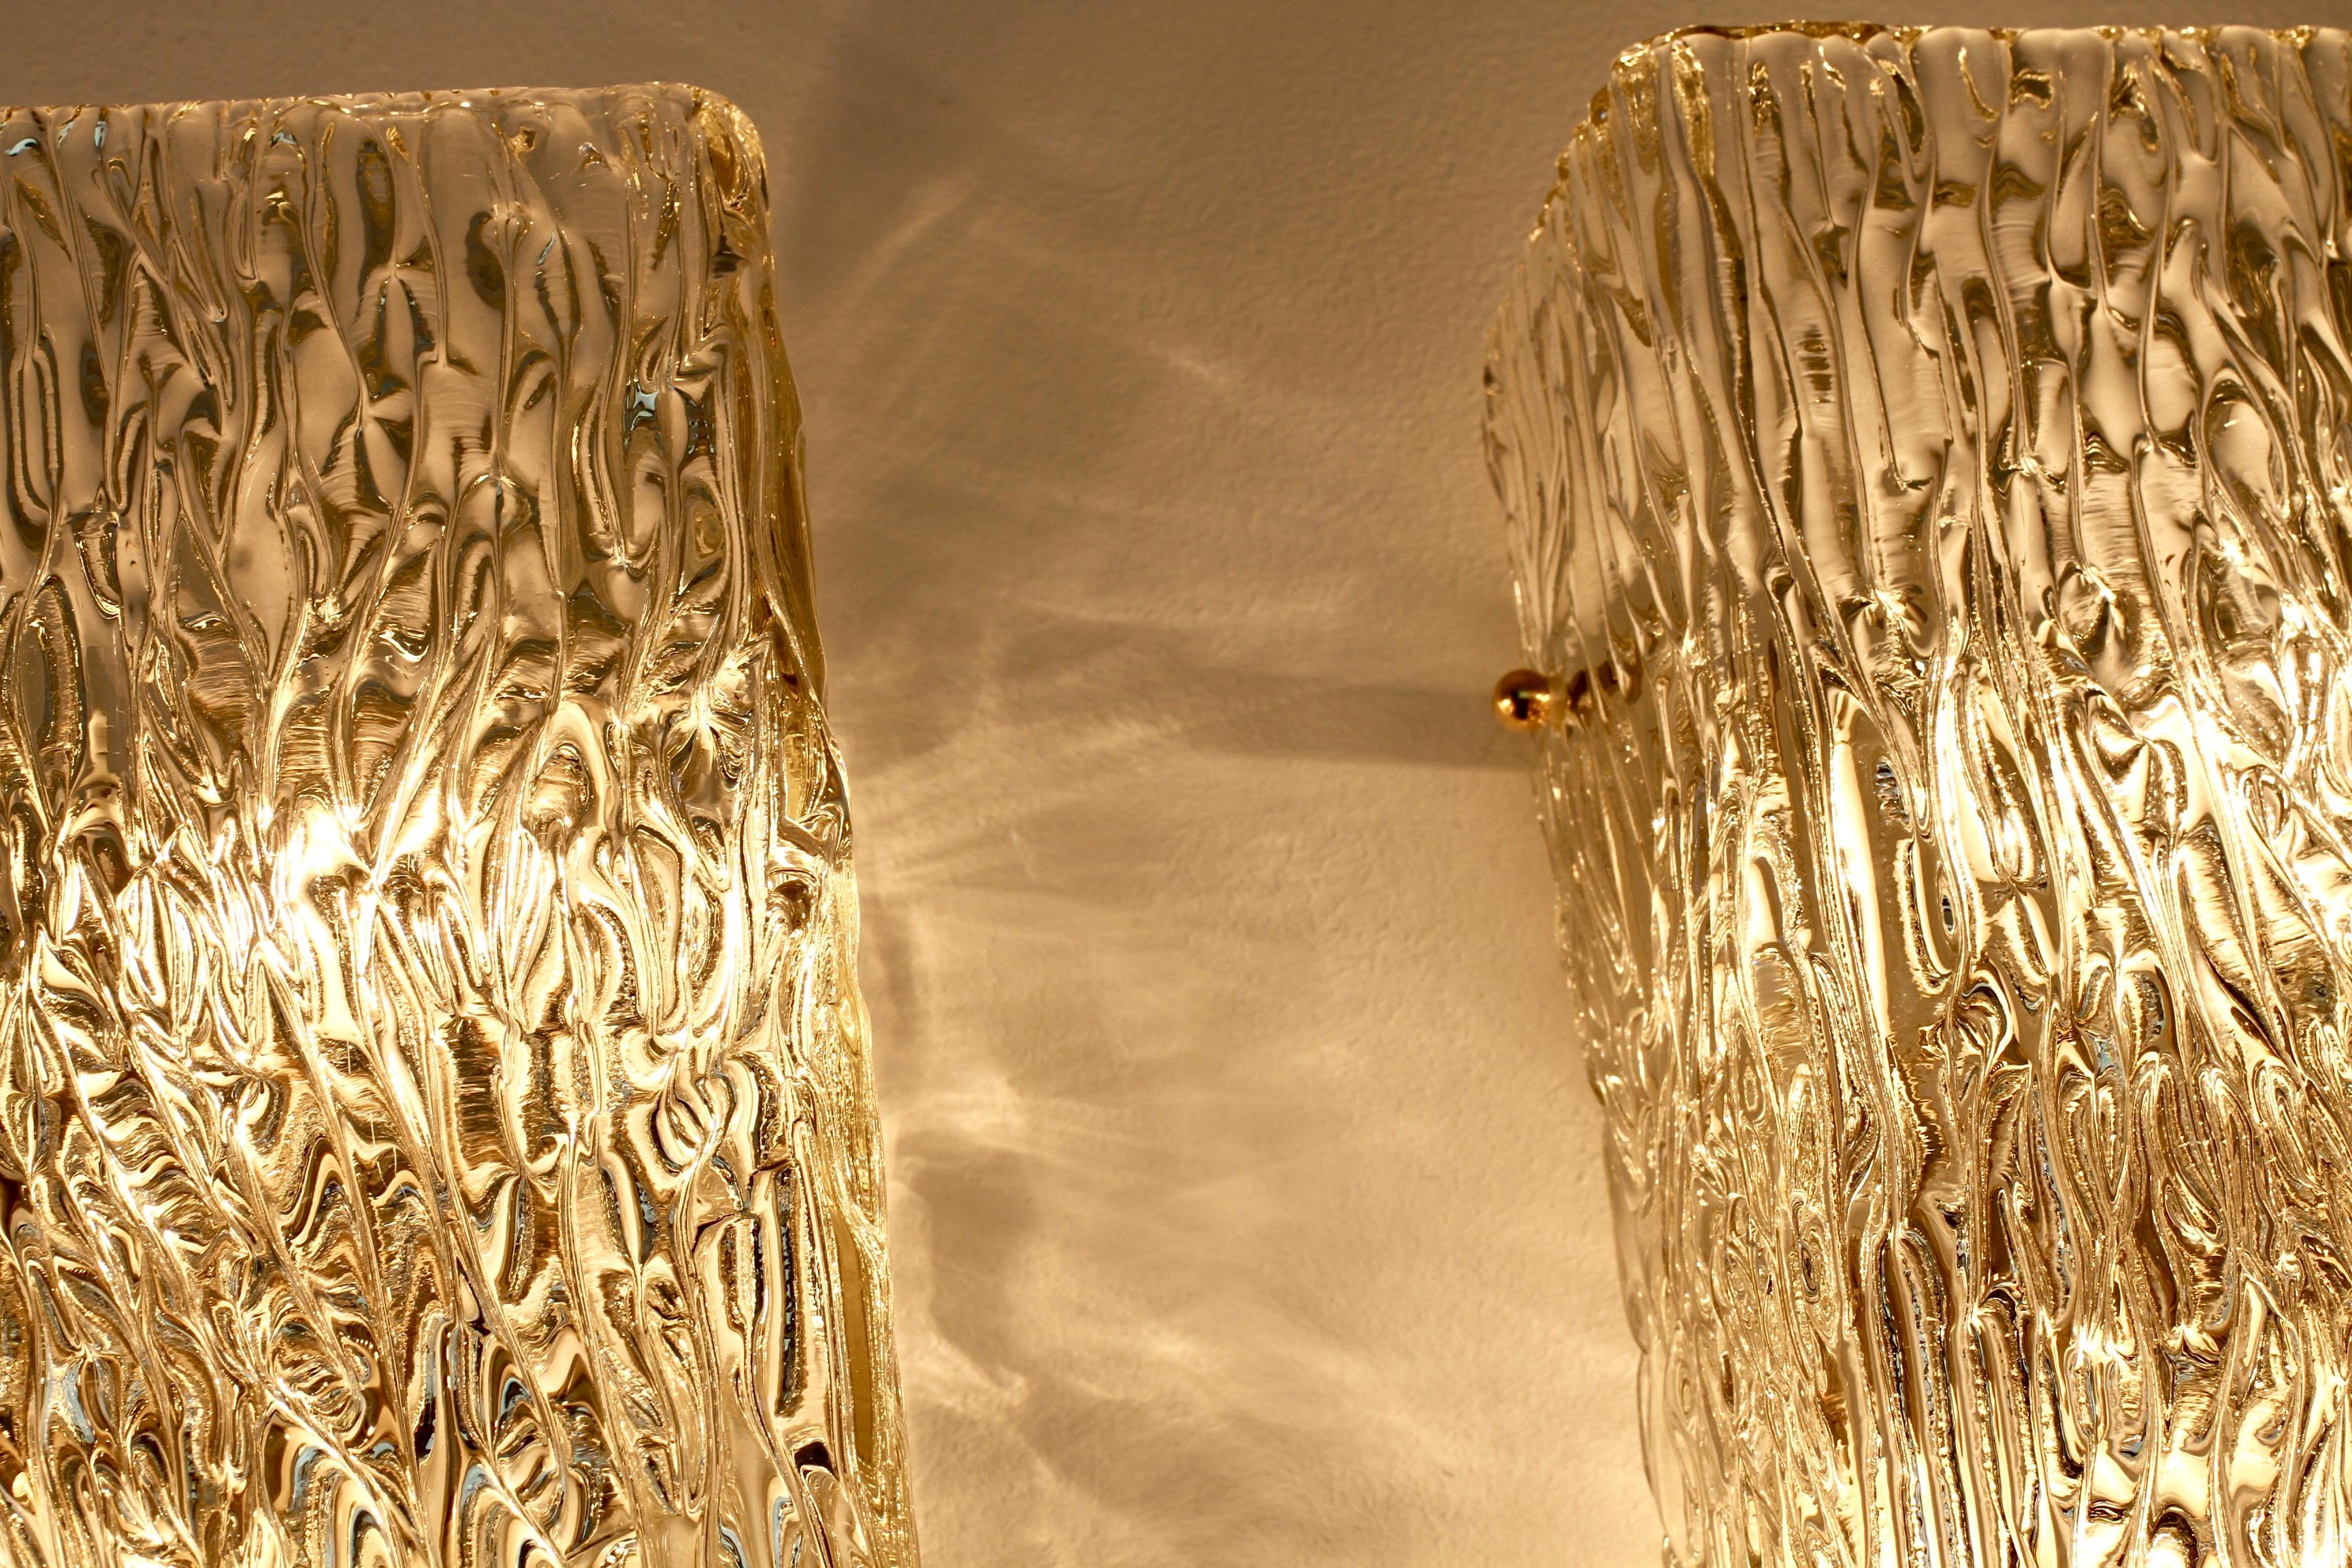 1 of 4 Large Austrian Textured Glass Wall Lights or Sconces by JT Kalmar c. 1955 For Sale 11